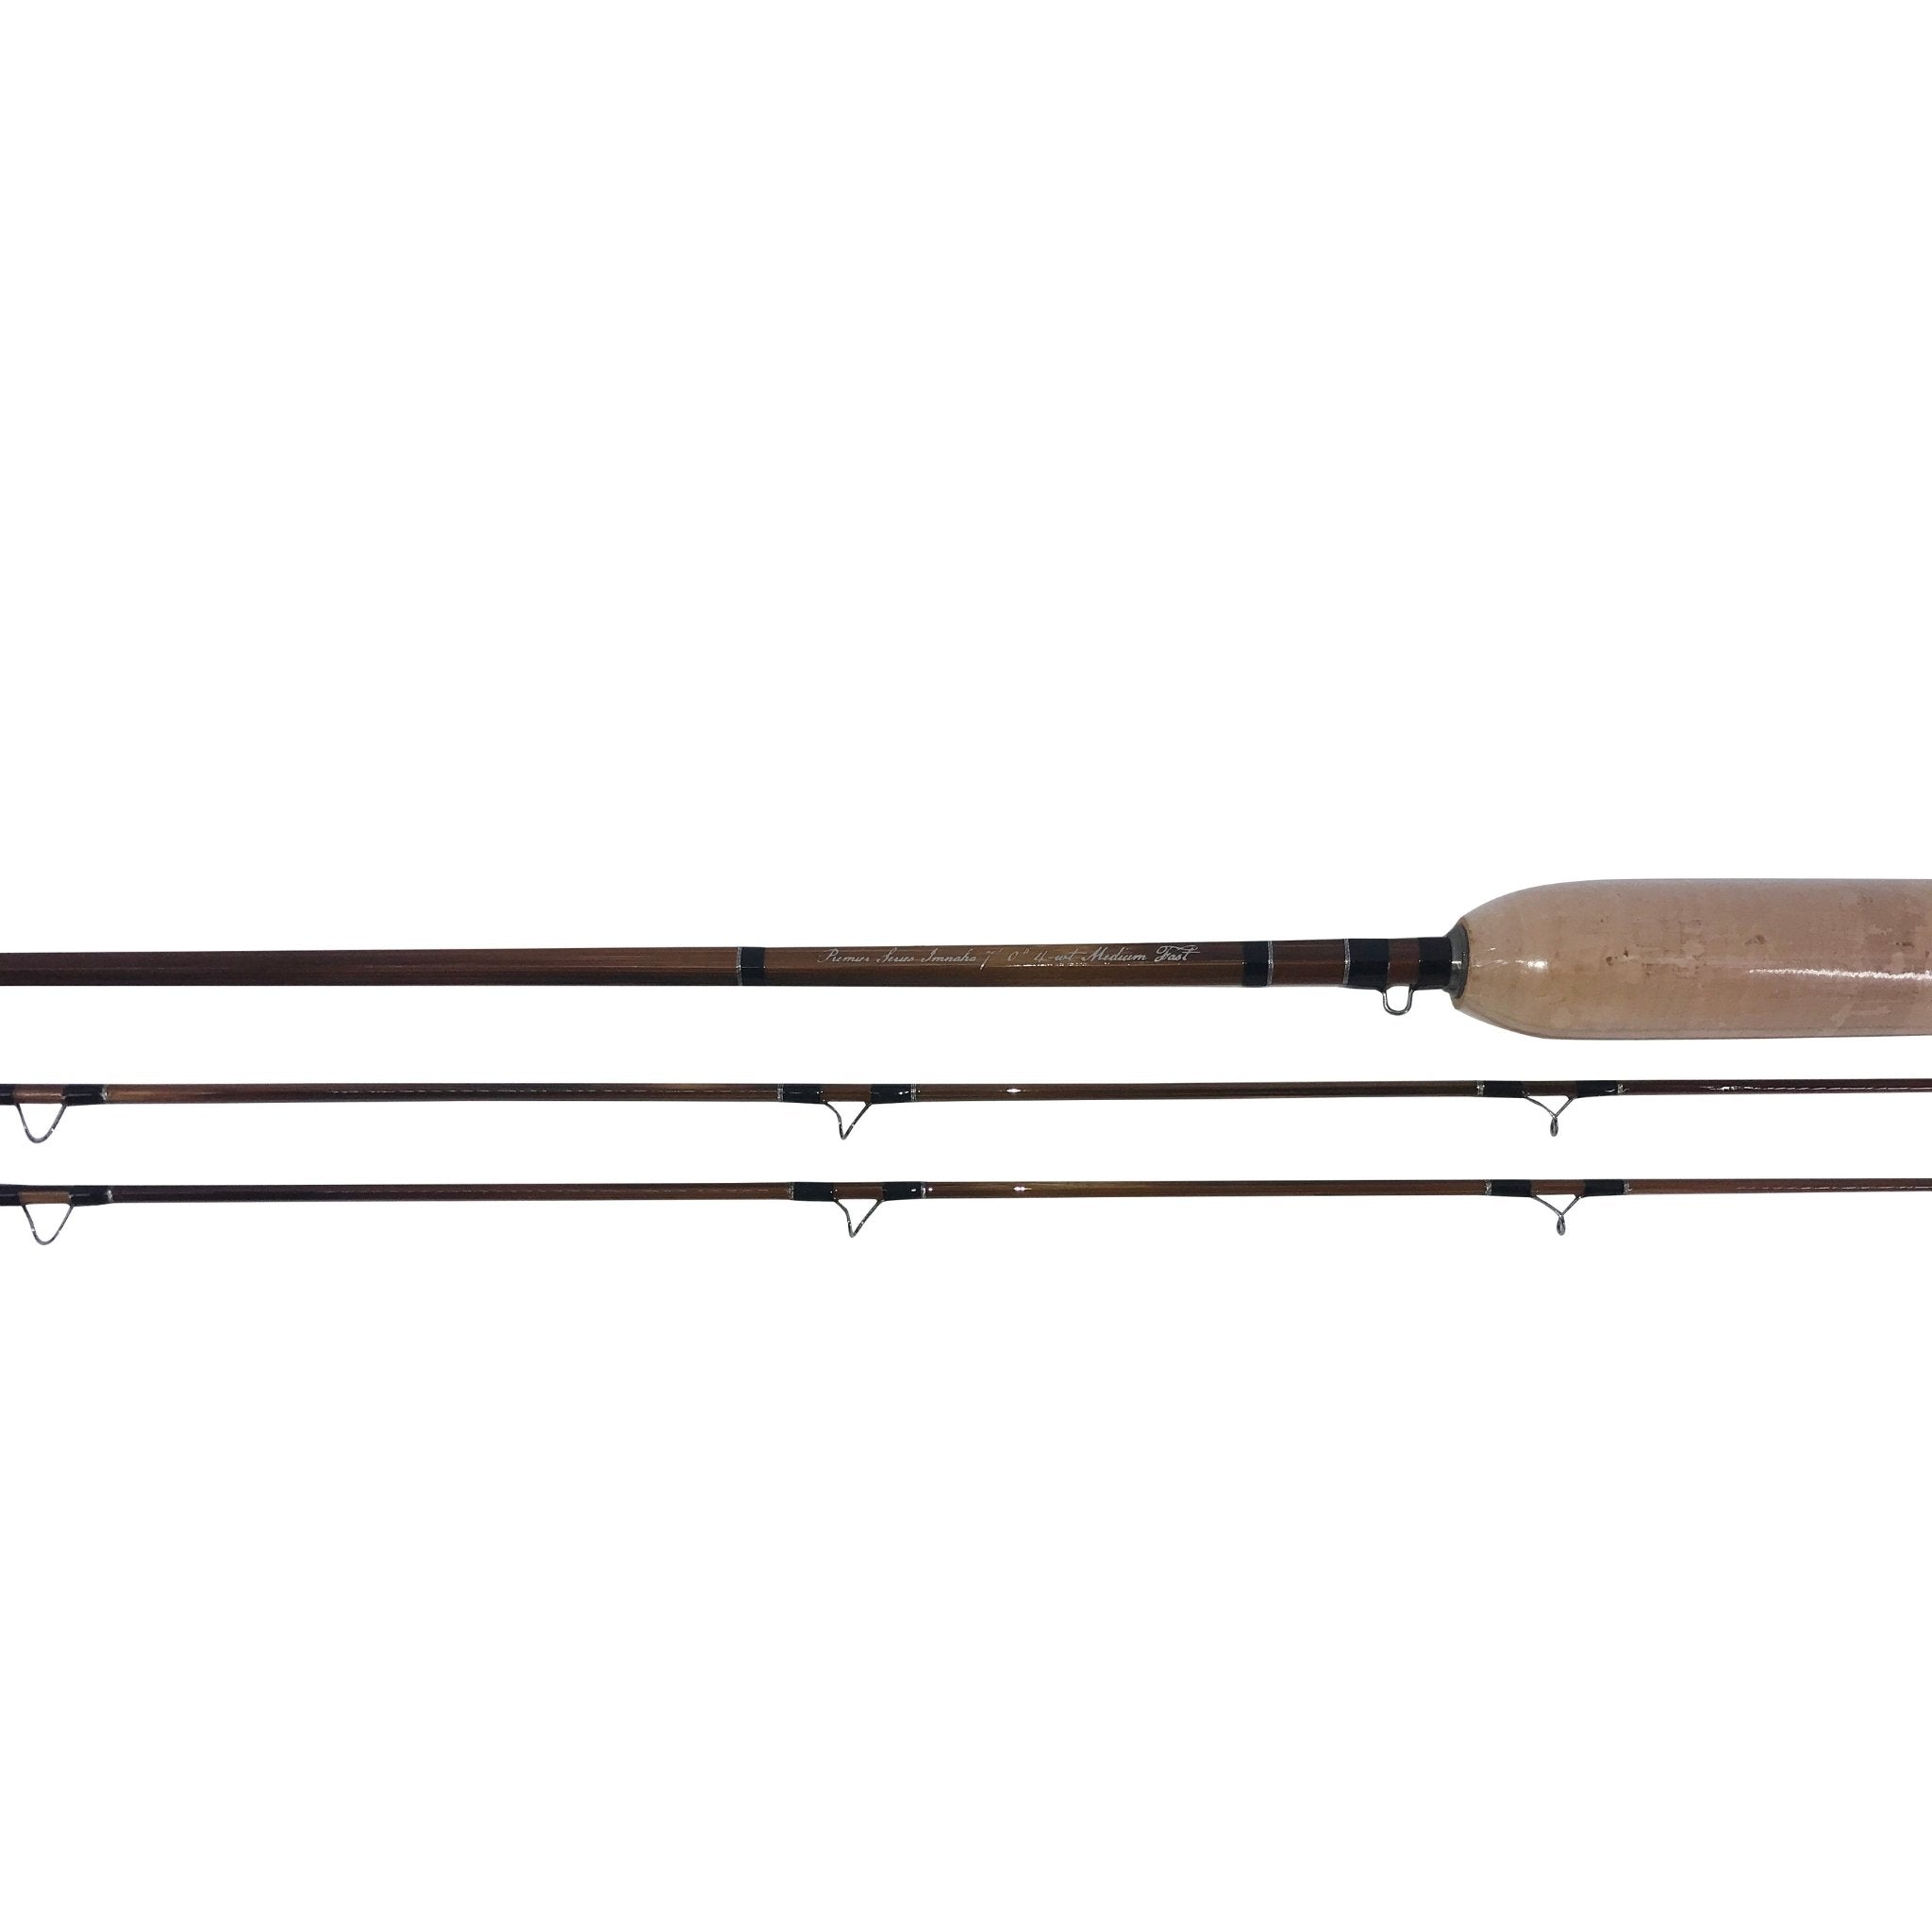 Premier Gallatin 7' 6 4-wt Medium Action Bamboo Fly Rod - Headwaters Bamboo